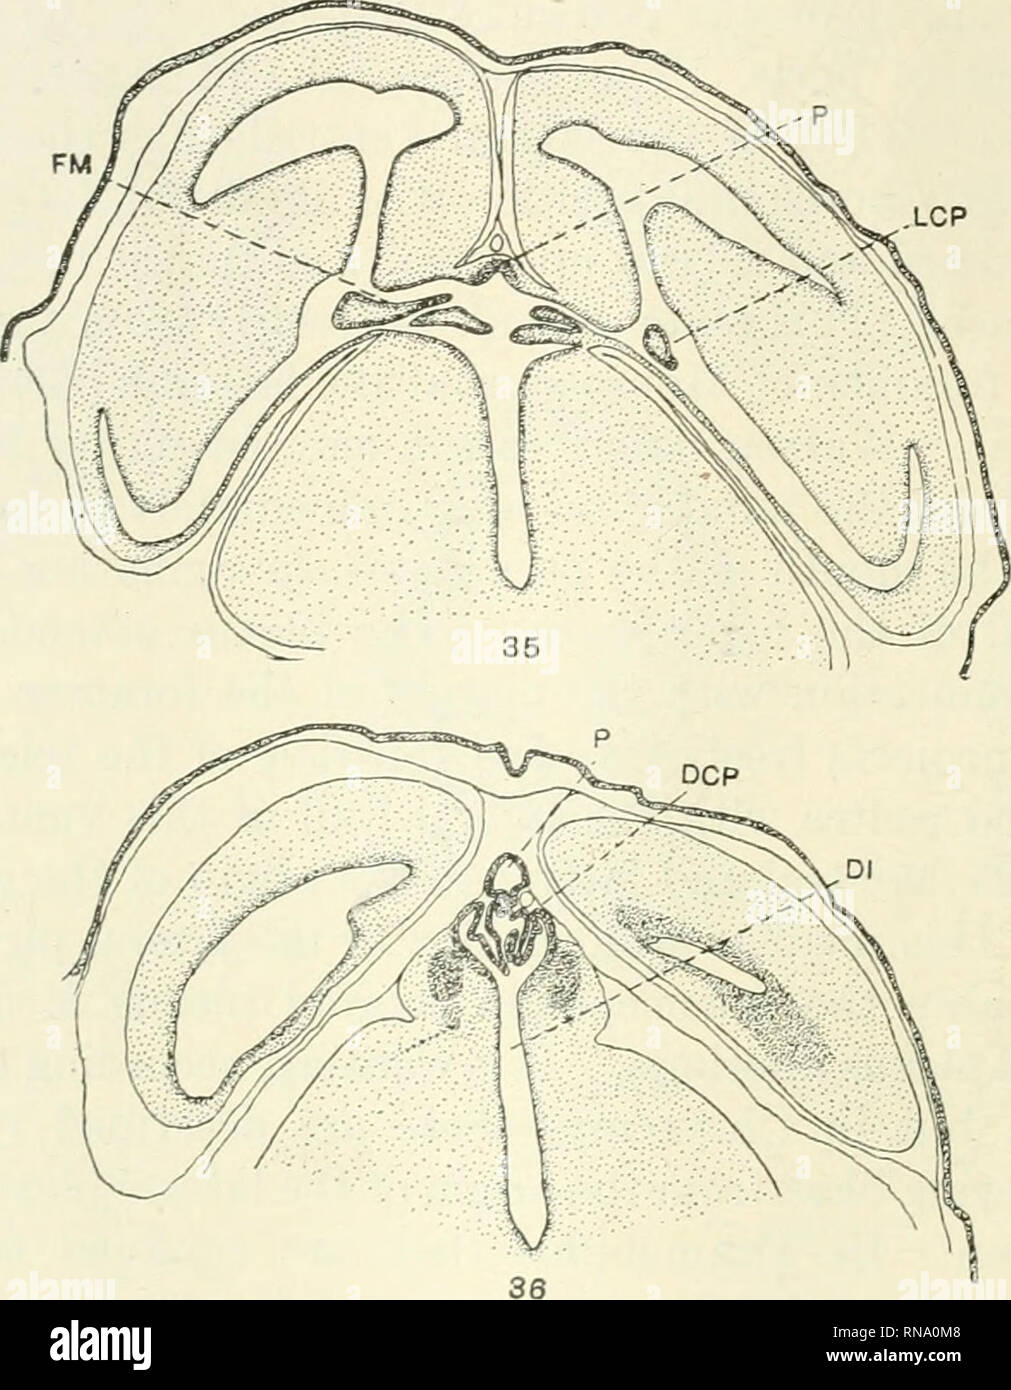 . The anatomical record. Anatomy; Anatomy. 628 B. W. KUXKEL. P'igs. 35-38 Transverse sections through the dorsal portion of an embrj'o (D), having a length of 80 mm., arranged from anterior to posterior, showing the paraphysis, lateral, median, and diencephalic choroid plexuses, ganglia haben- ulae, superior commissure, and a pocket of the roof of the diencephalon cut off bj^ the superior commissure. X 20. between the superior and posterior commissures and is directed almost exactly dorso-ventrally. The body of the epiphysis is large and pear-shaped. In one specimen it exhibited a small lumen  Stock Photo